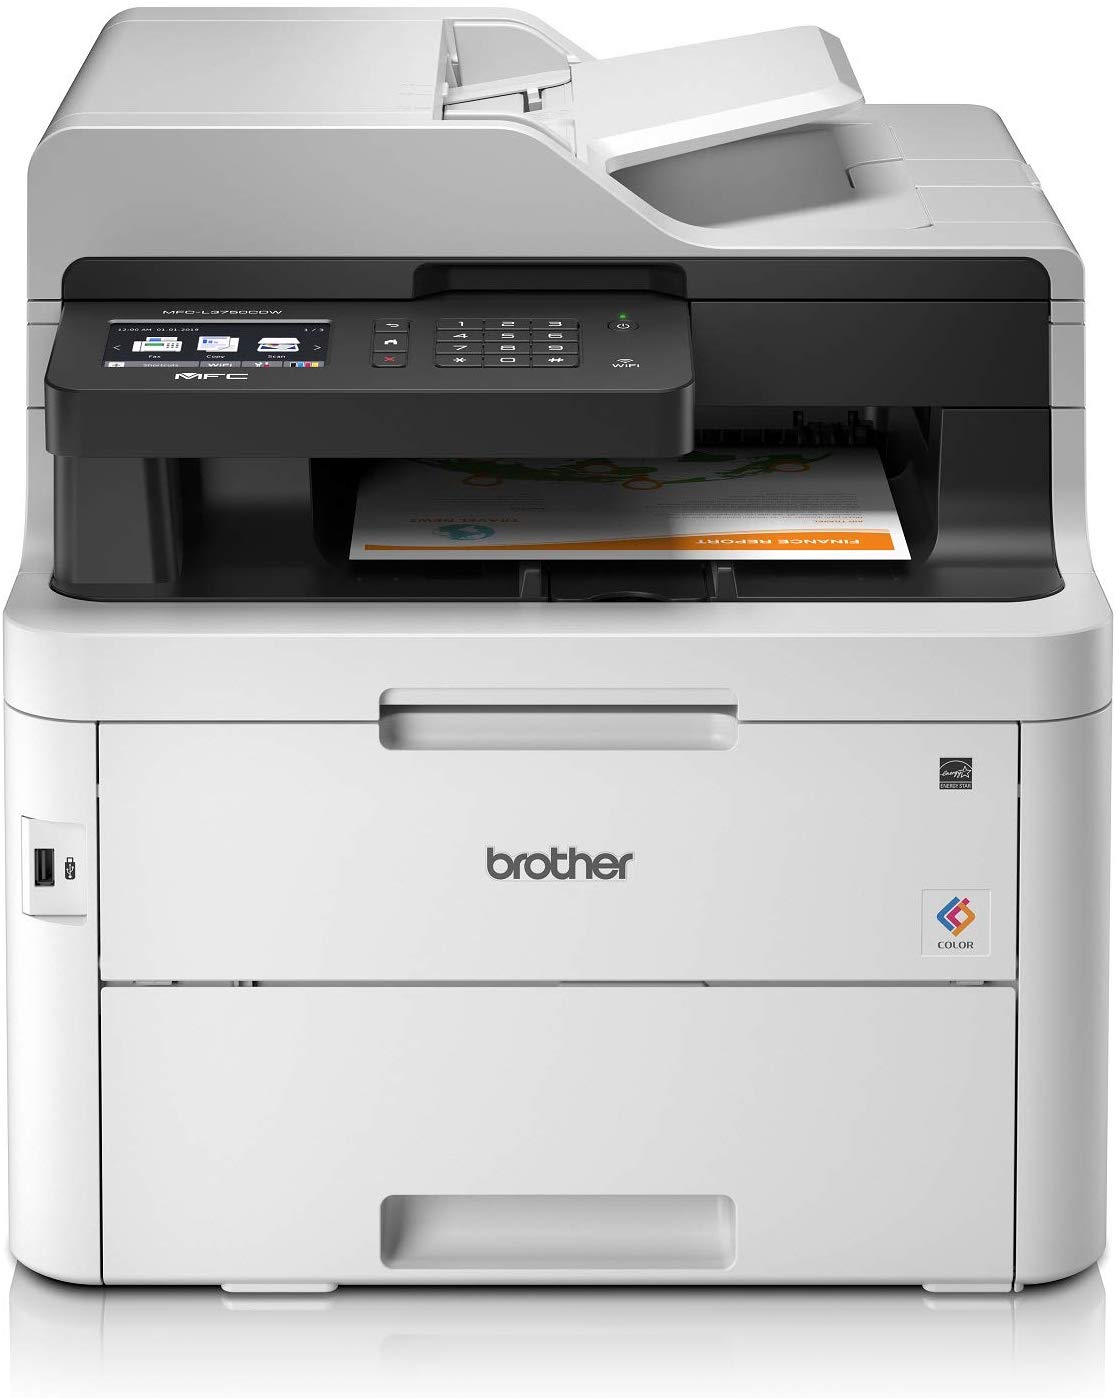 Brother MFC-L3750cdw – A4 Color MFP